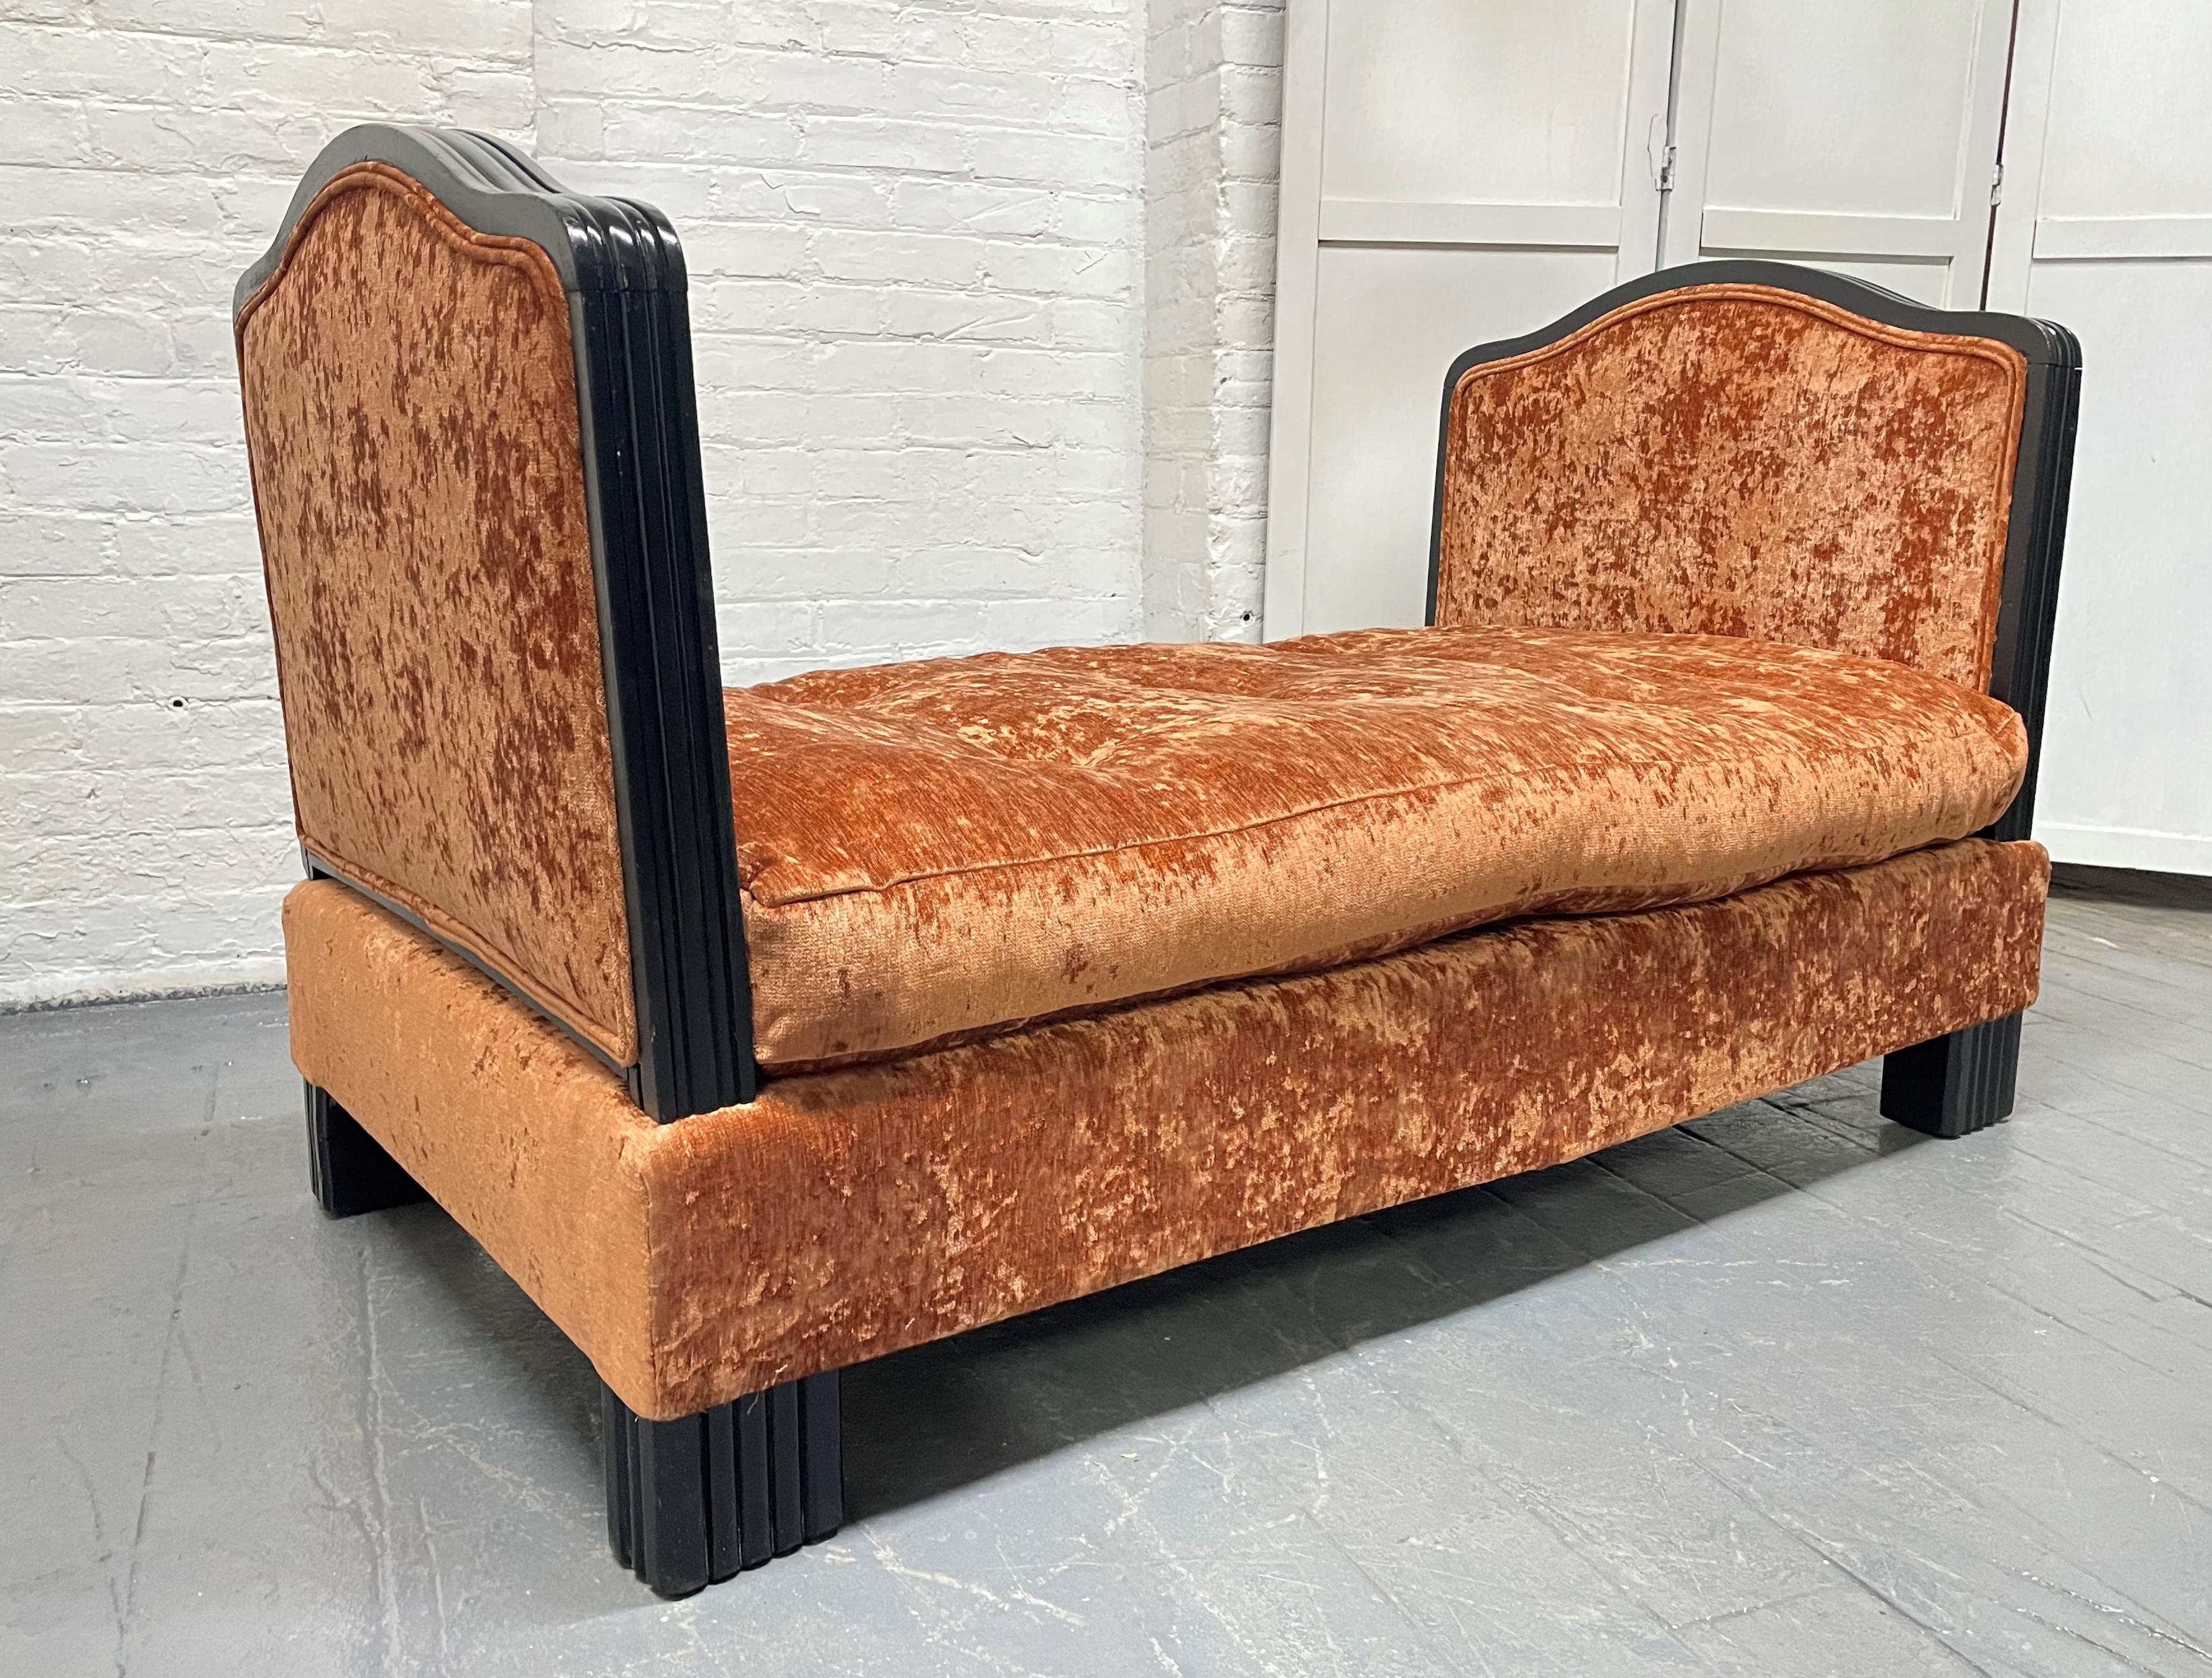 French Art Deco velvet daybed or large bench with removable ends. The daybed has a black lacquered trim and legs. The daybed has a loose cushioned seat.